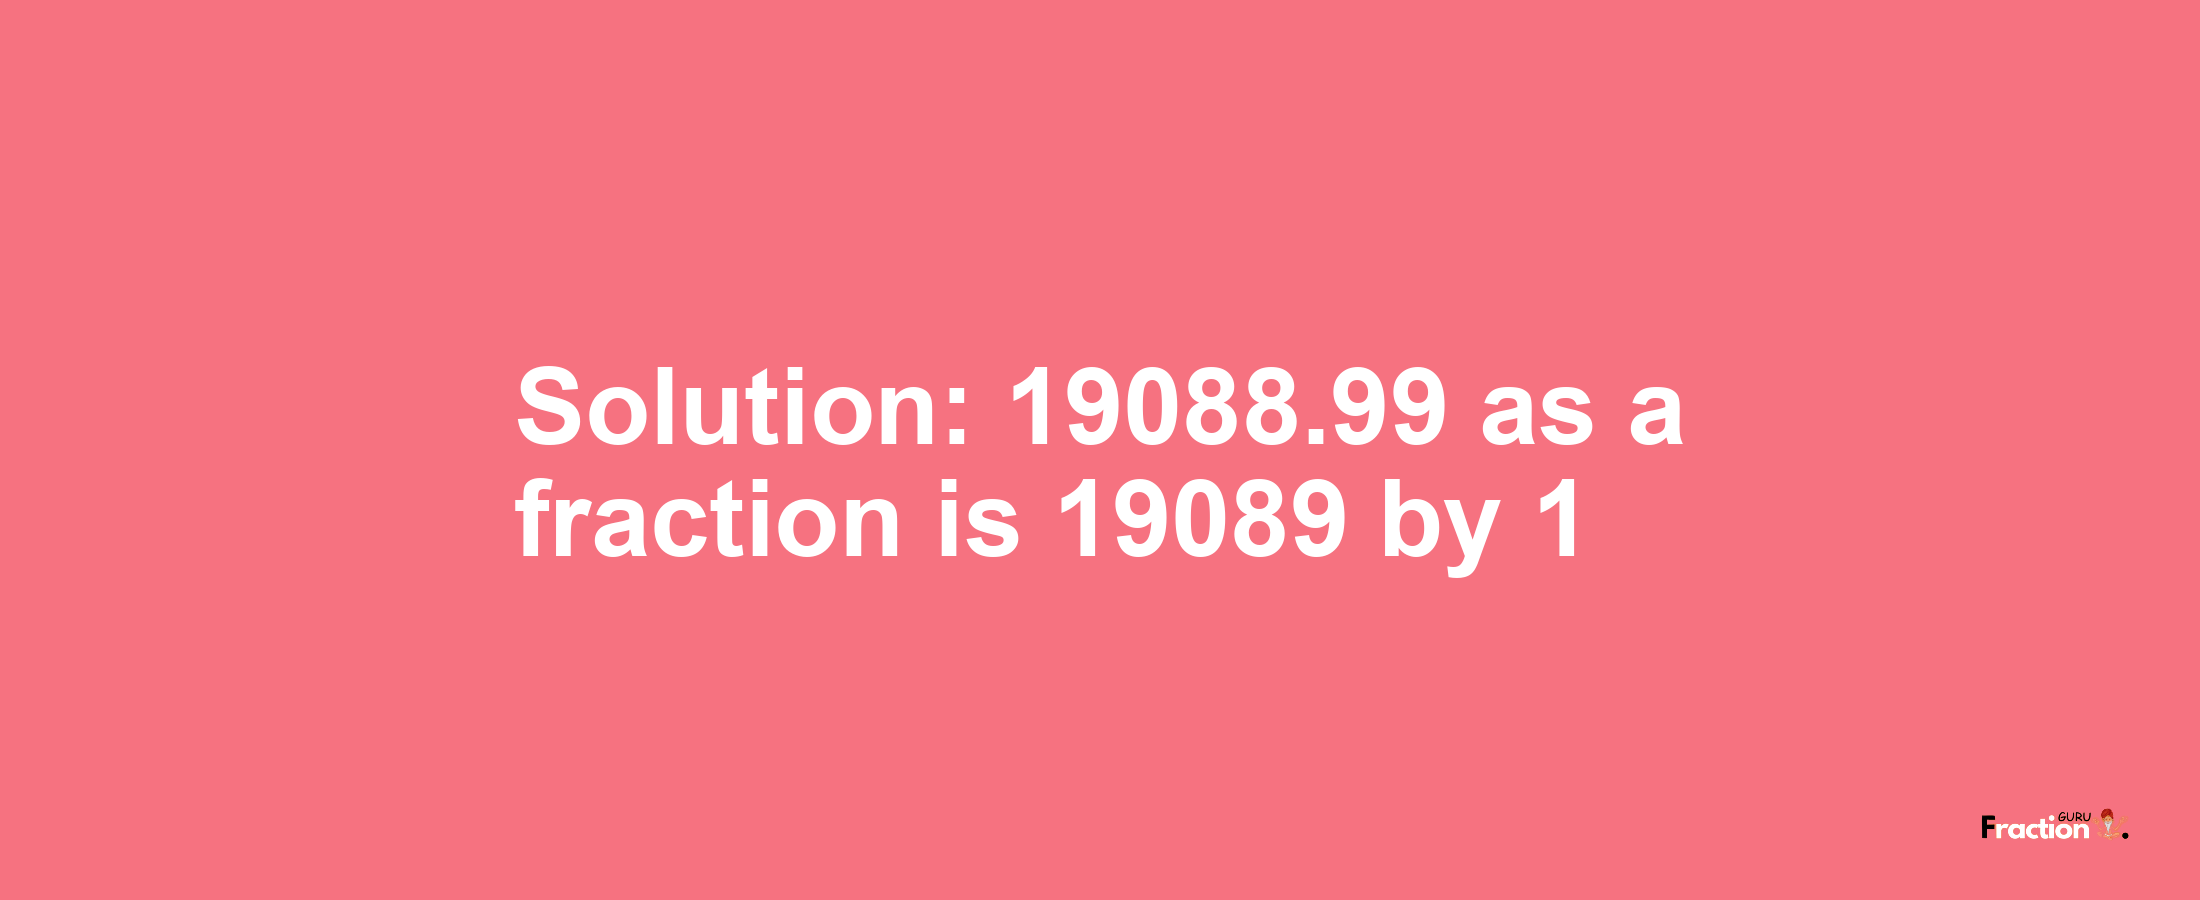 Solution:19088.99 as a fraction is 19089/1